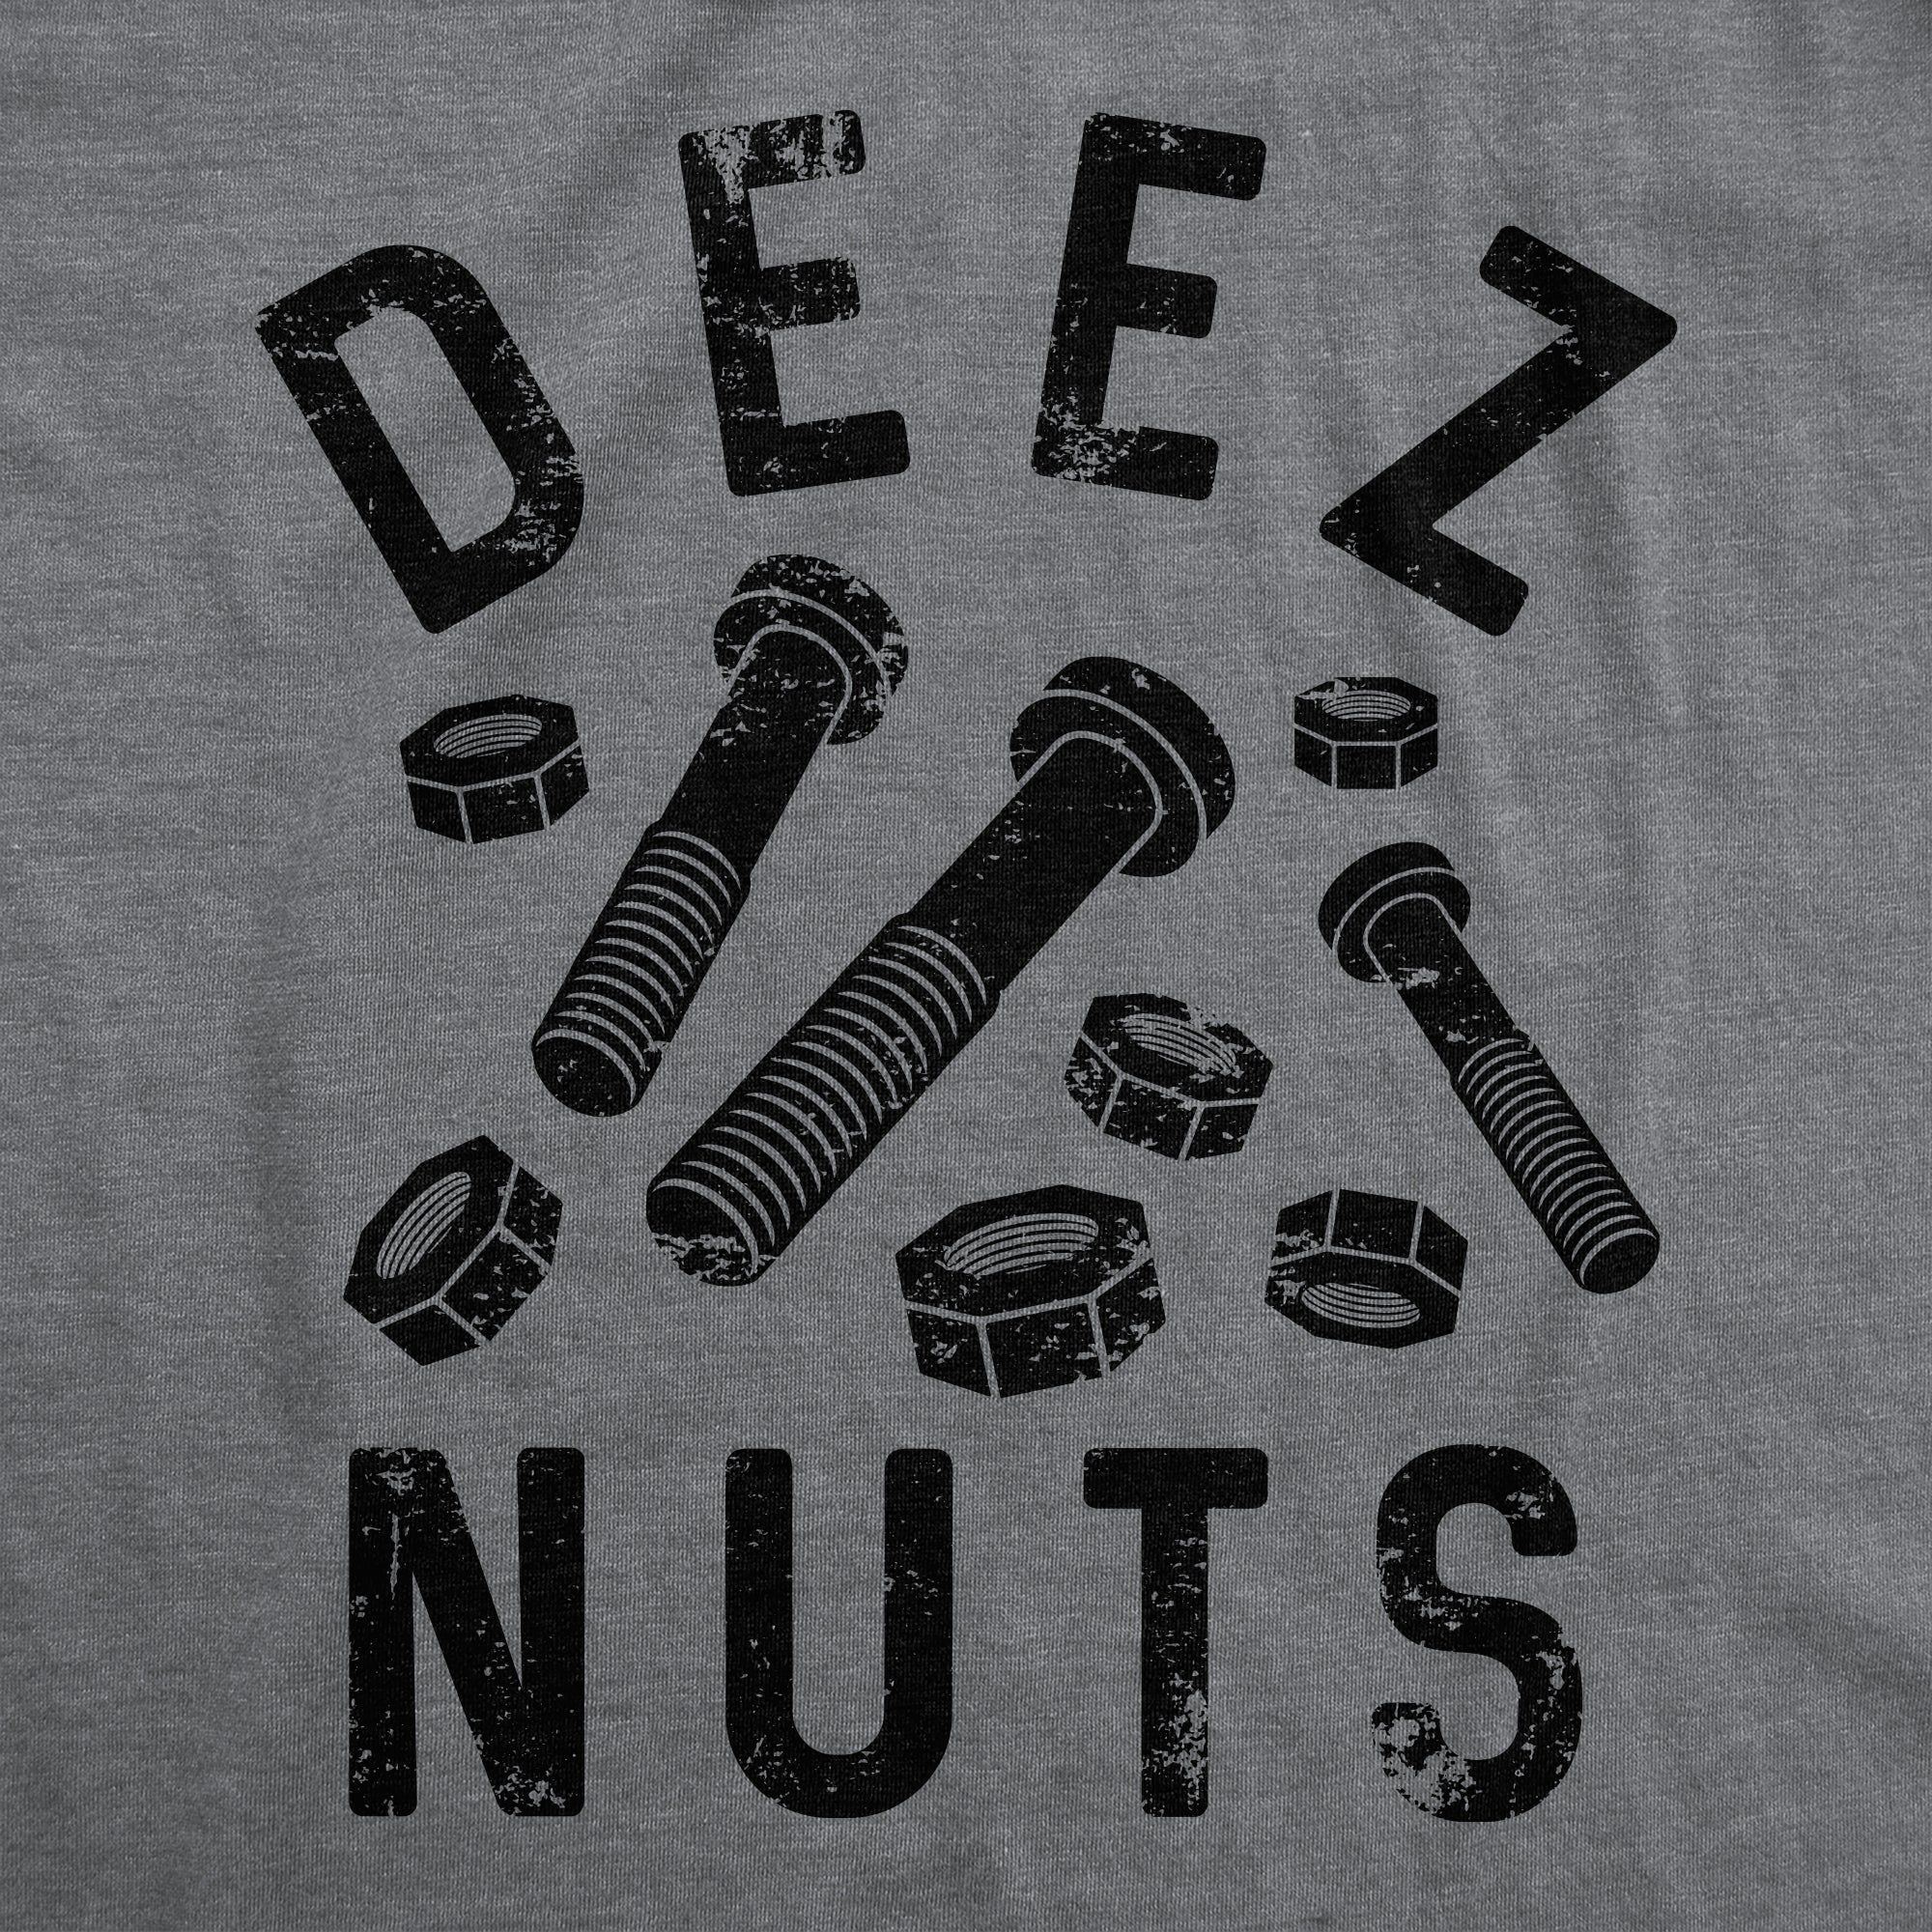 Funny Dark Heather Grey Deez Nuts (And Bolts) Mens T Shirt Nerdy Father's Day Tee